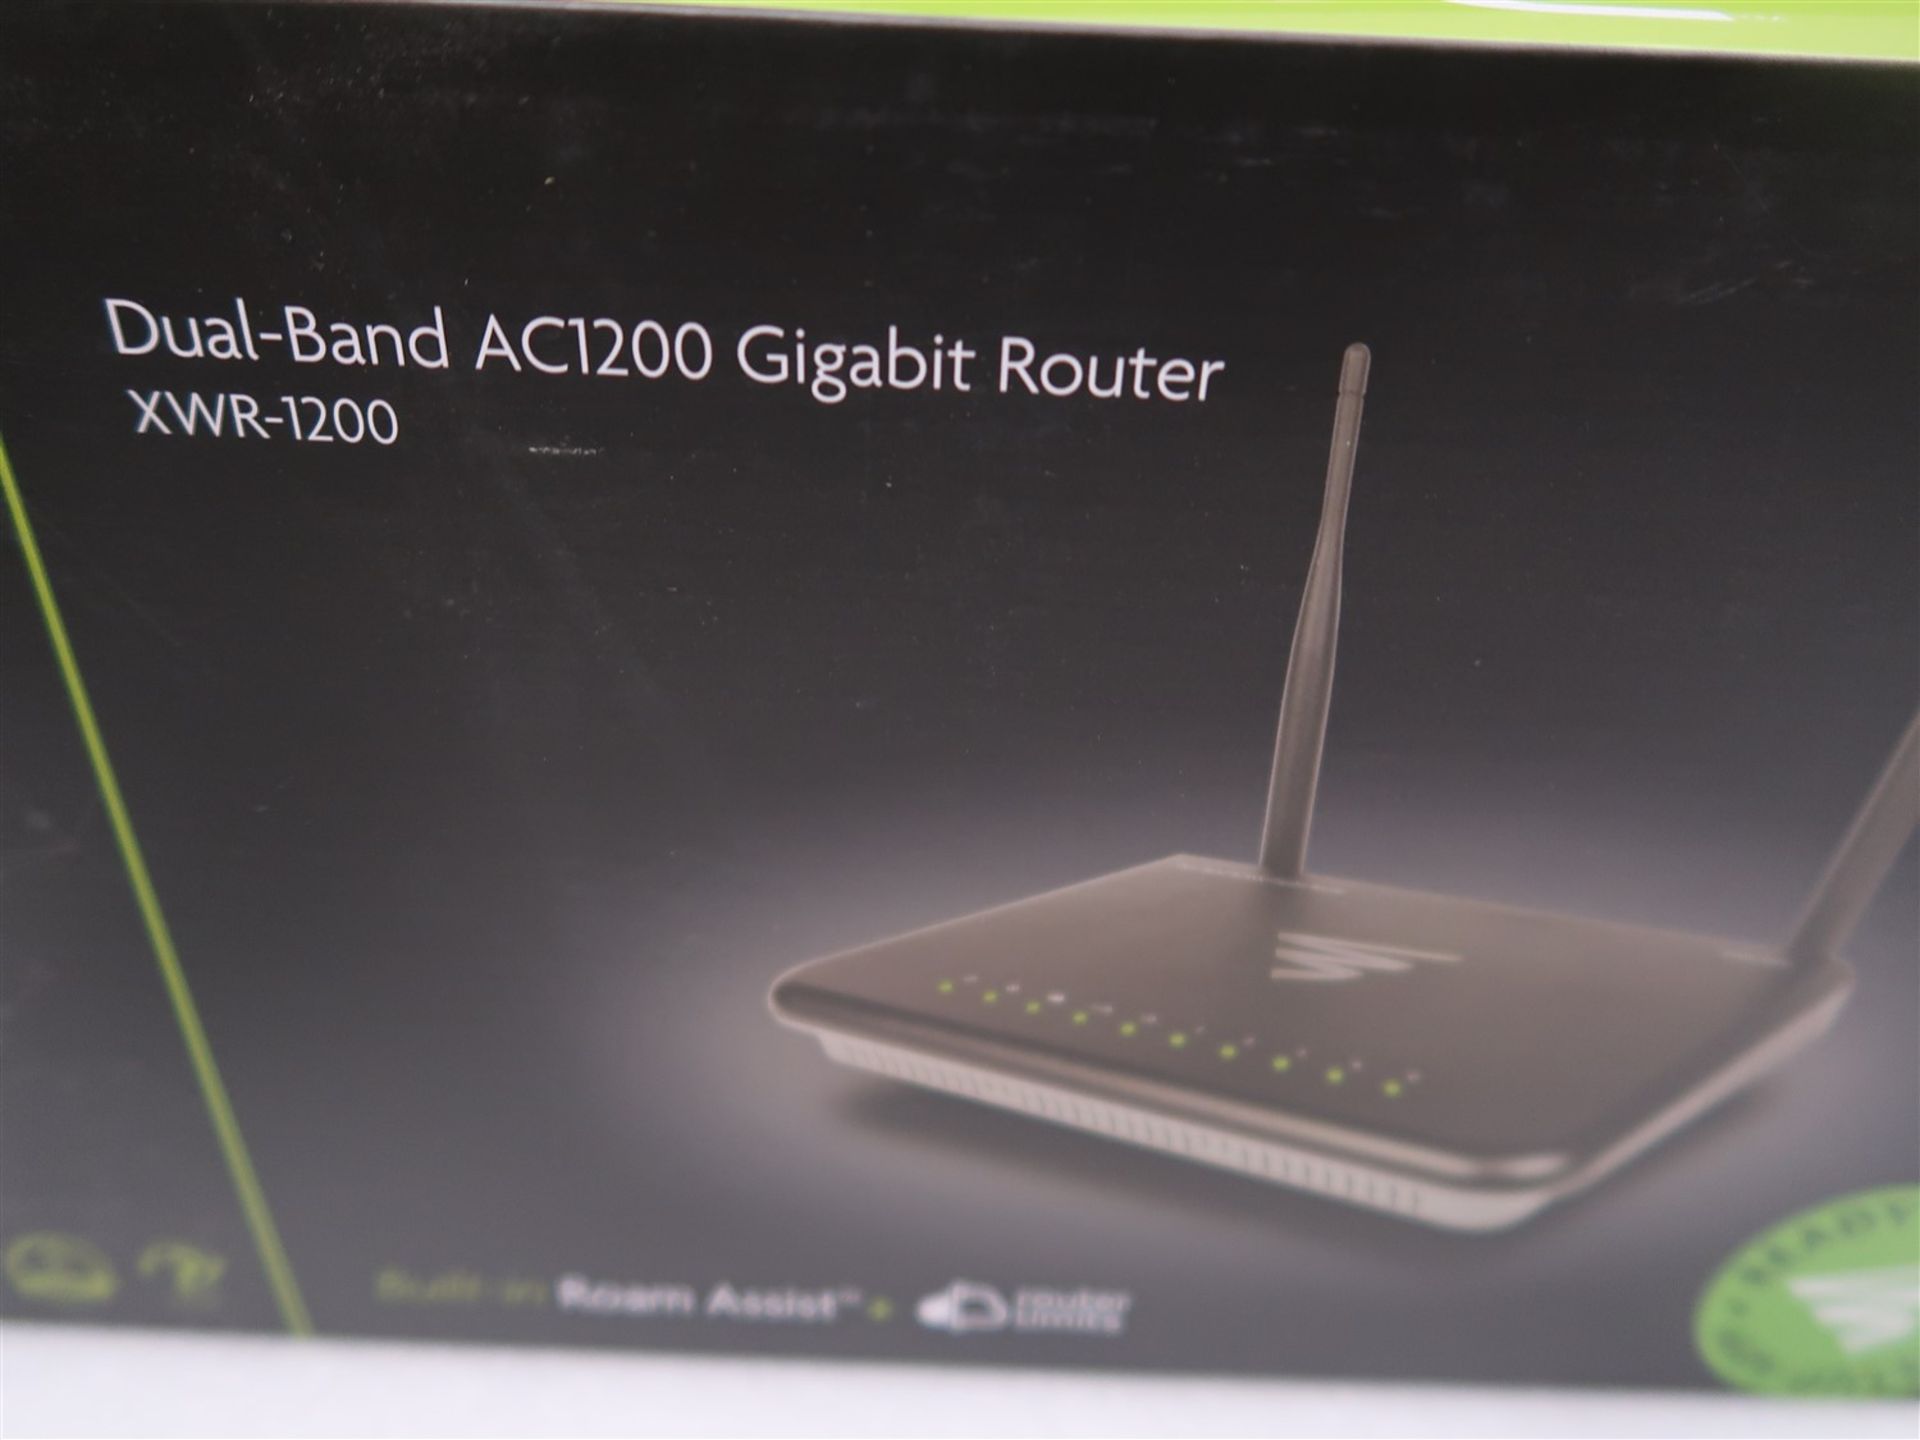 LUXUL DUAL BAND AC1200 GIGABIT ROUTER XWR-1200, (BNIB) MSRP $265 - Image 2 of 3